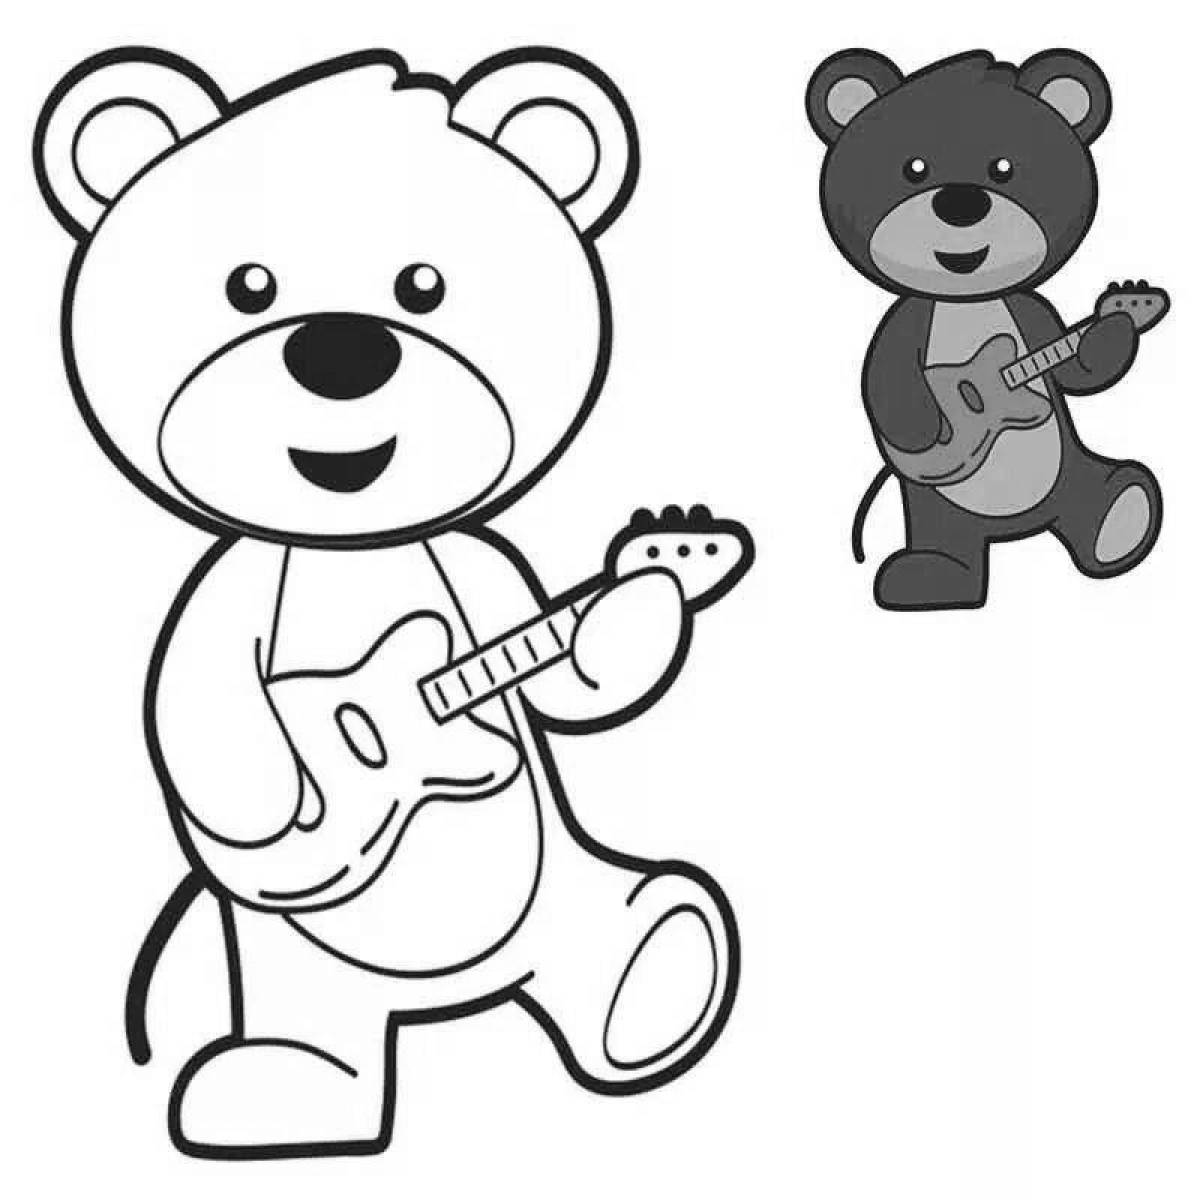 Bear picture for kids #2